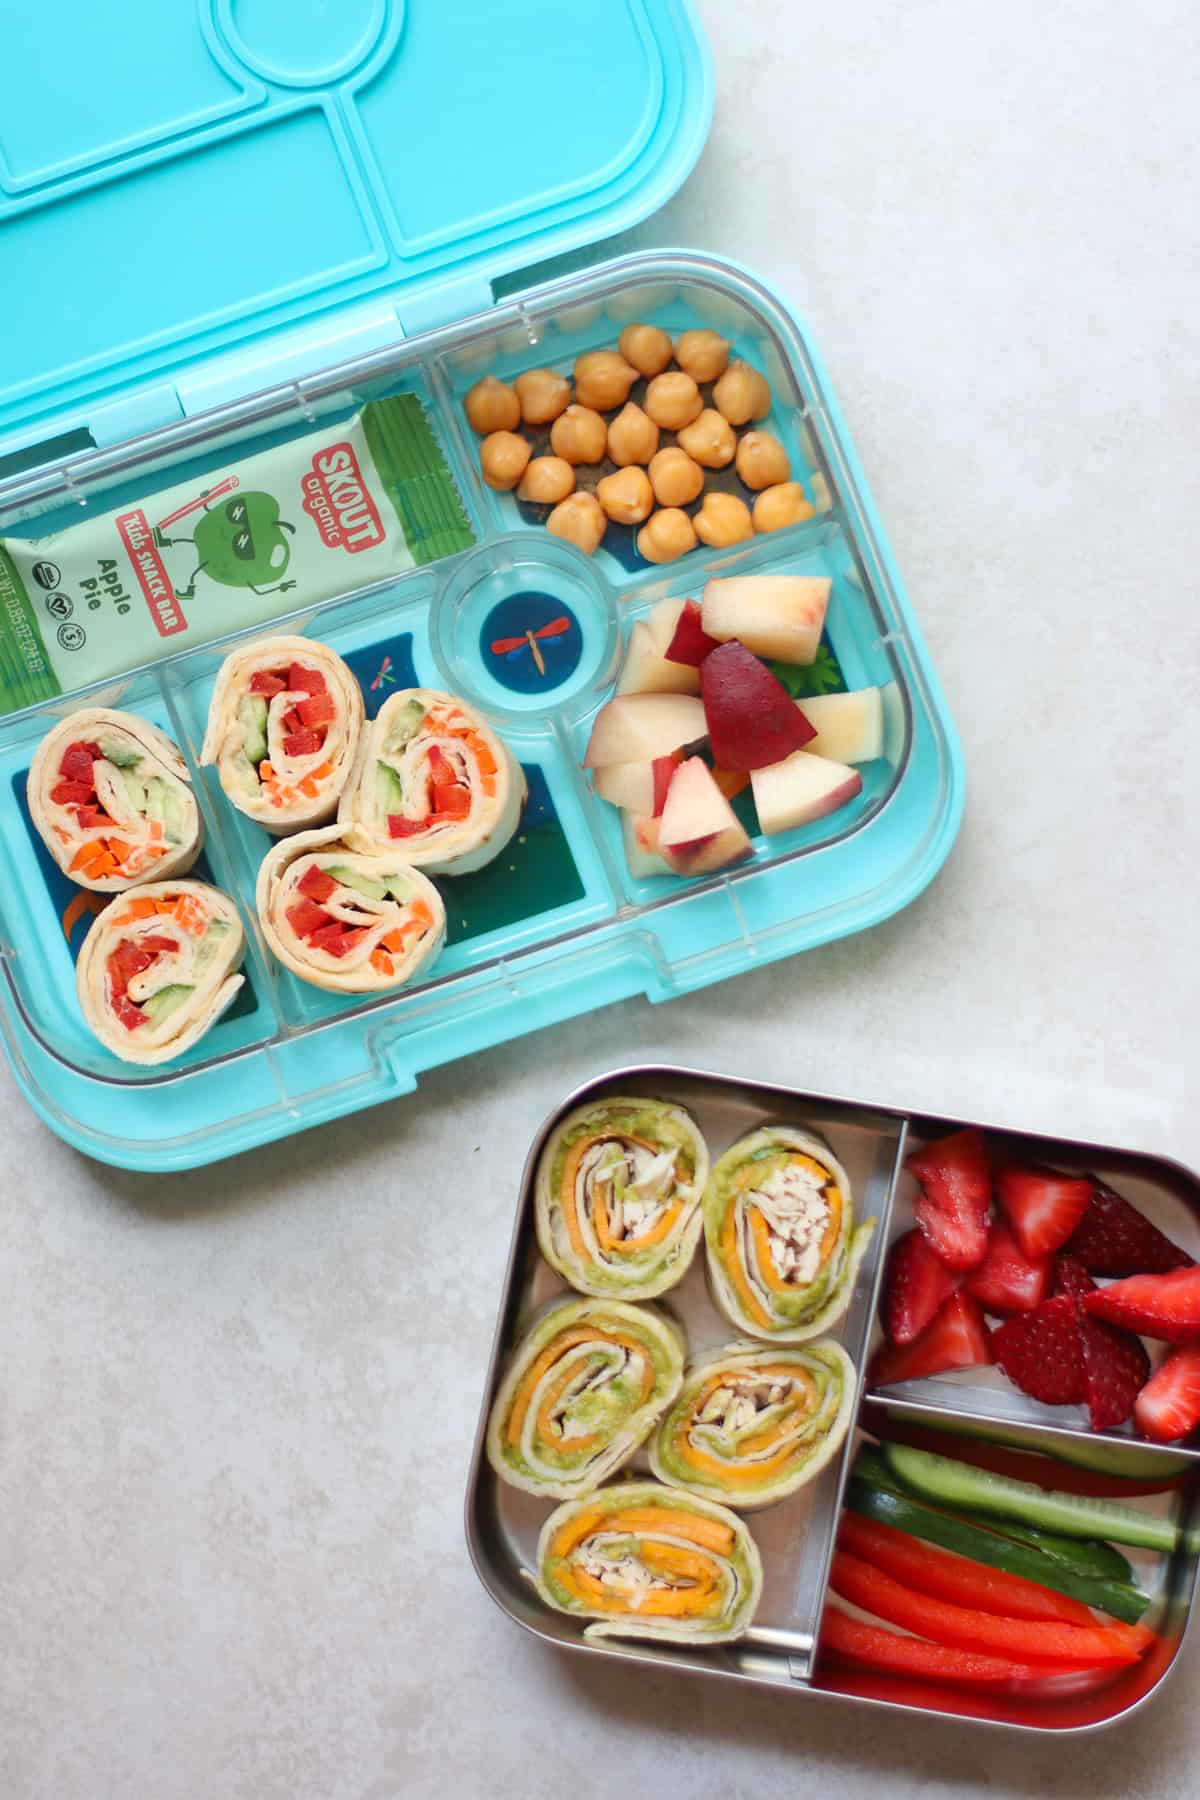 Two lunchboxes each with pinwheel sandwiches, fruits, and vegetables.